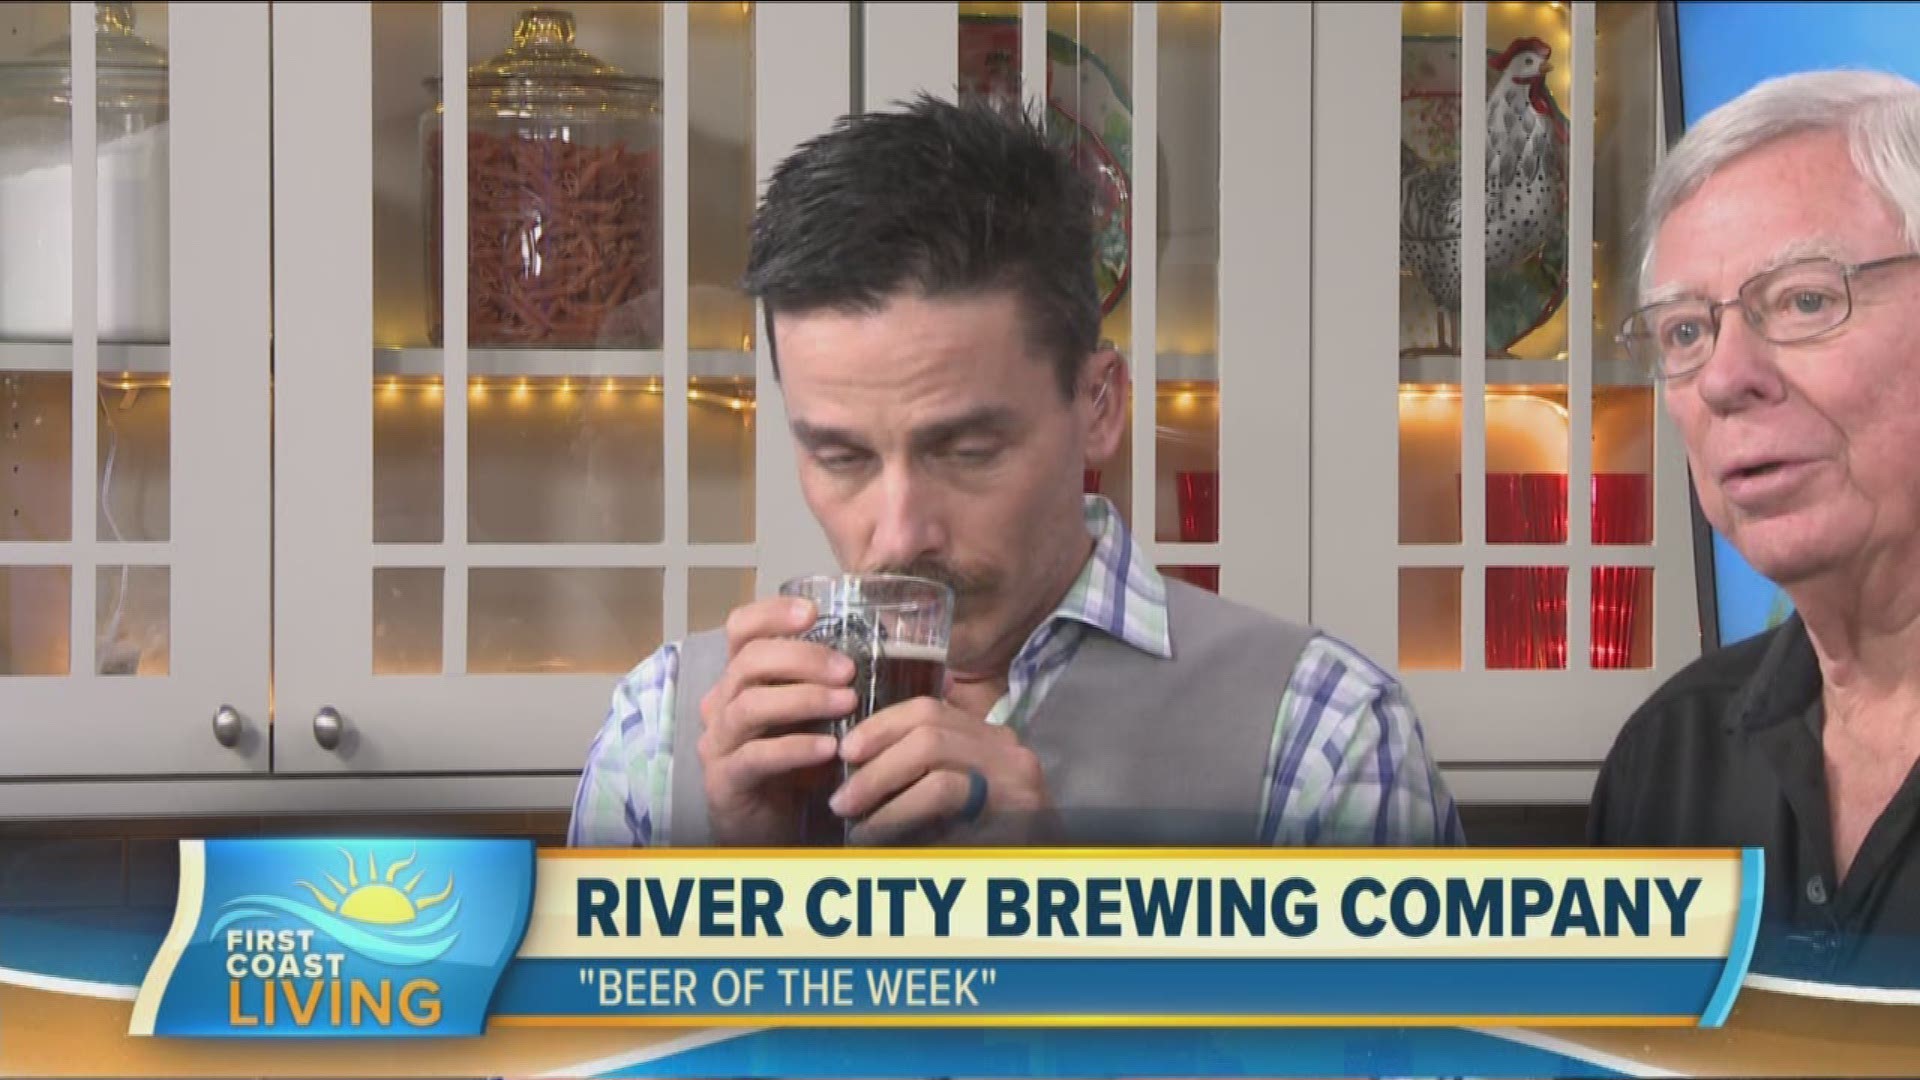 Lots of breweries are popping up around Jacksonville, but River City Brewing has been around for a while. Check out the craft that's the Beer of the Week.